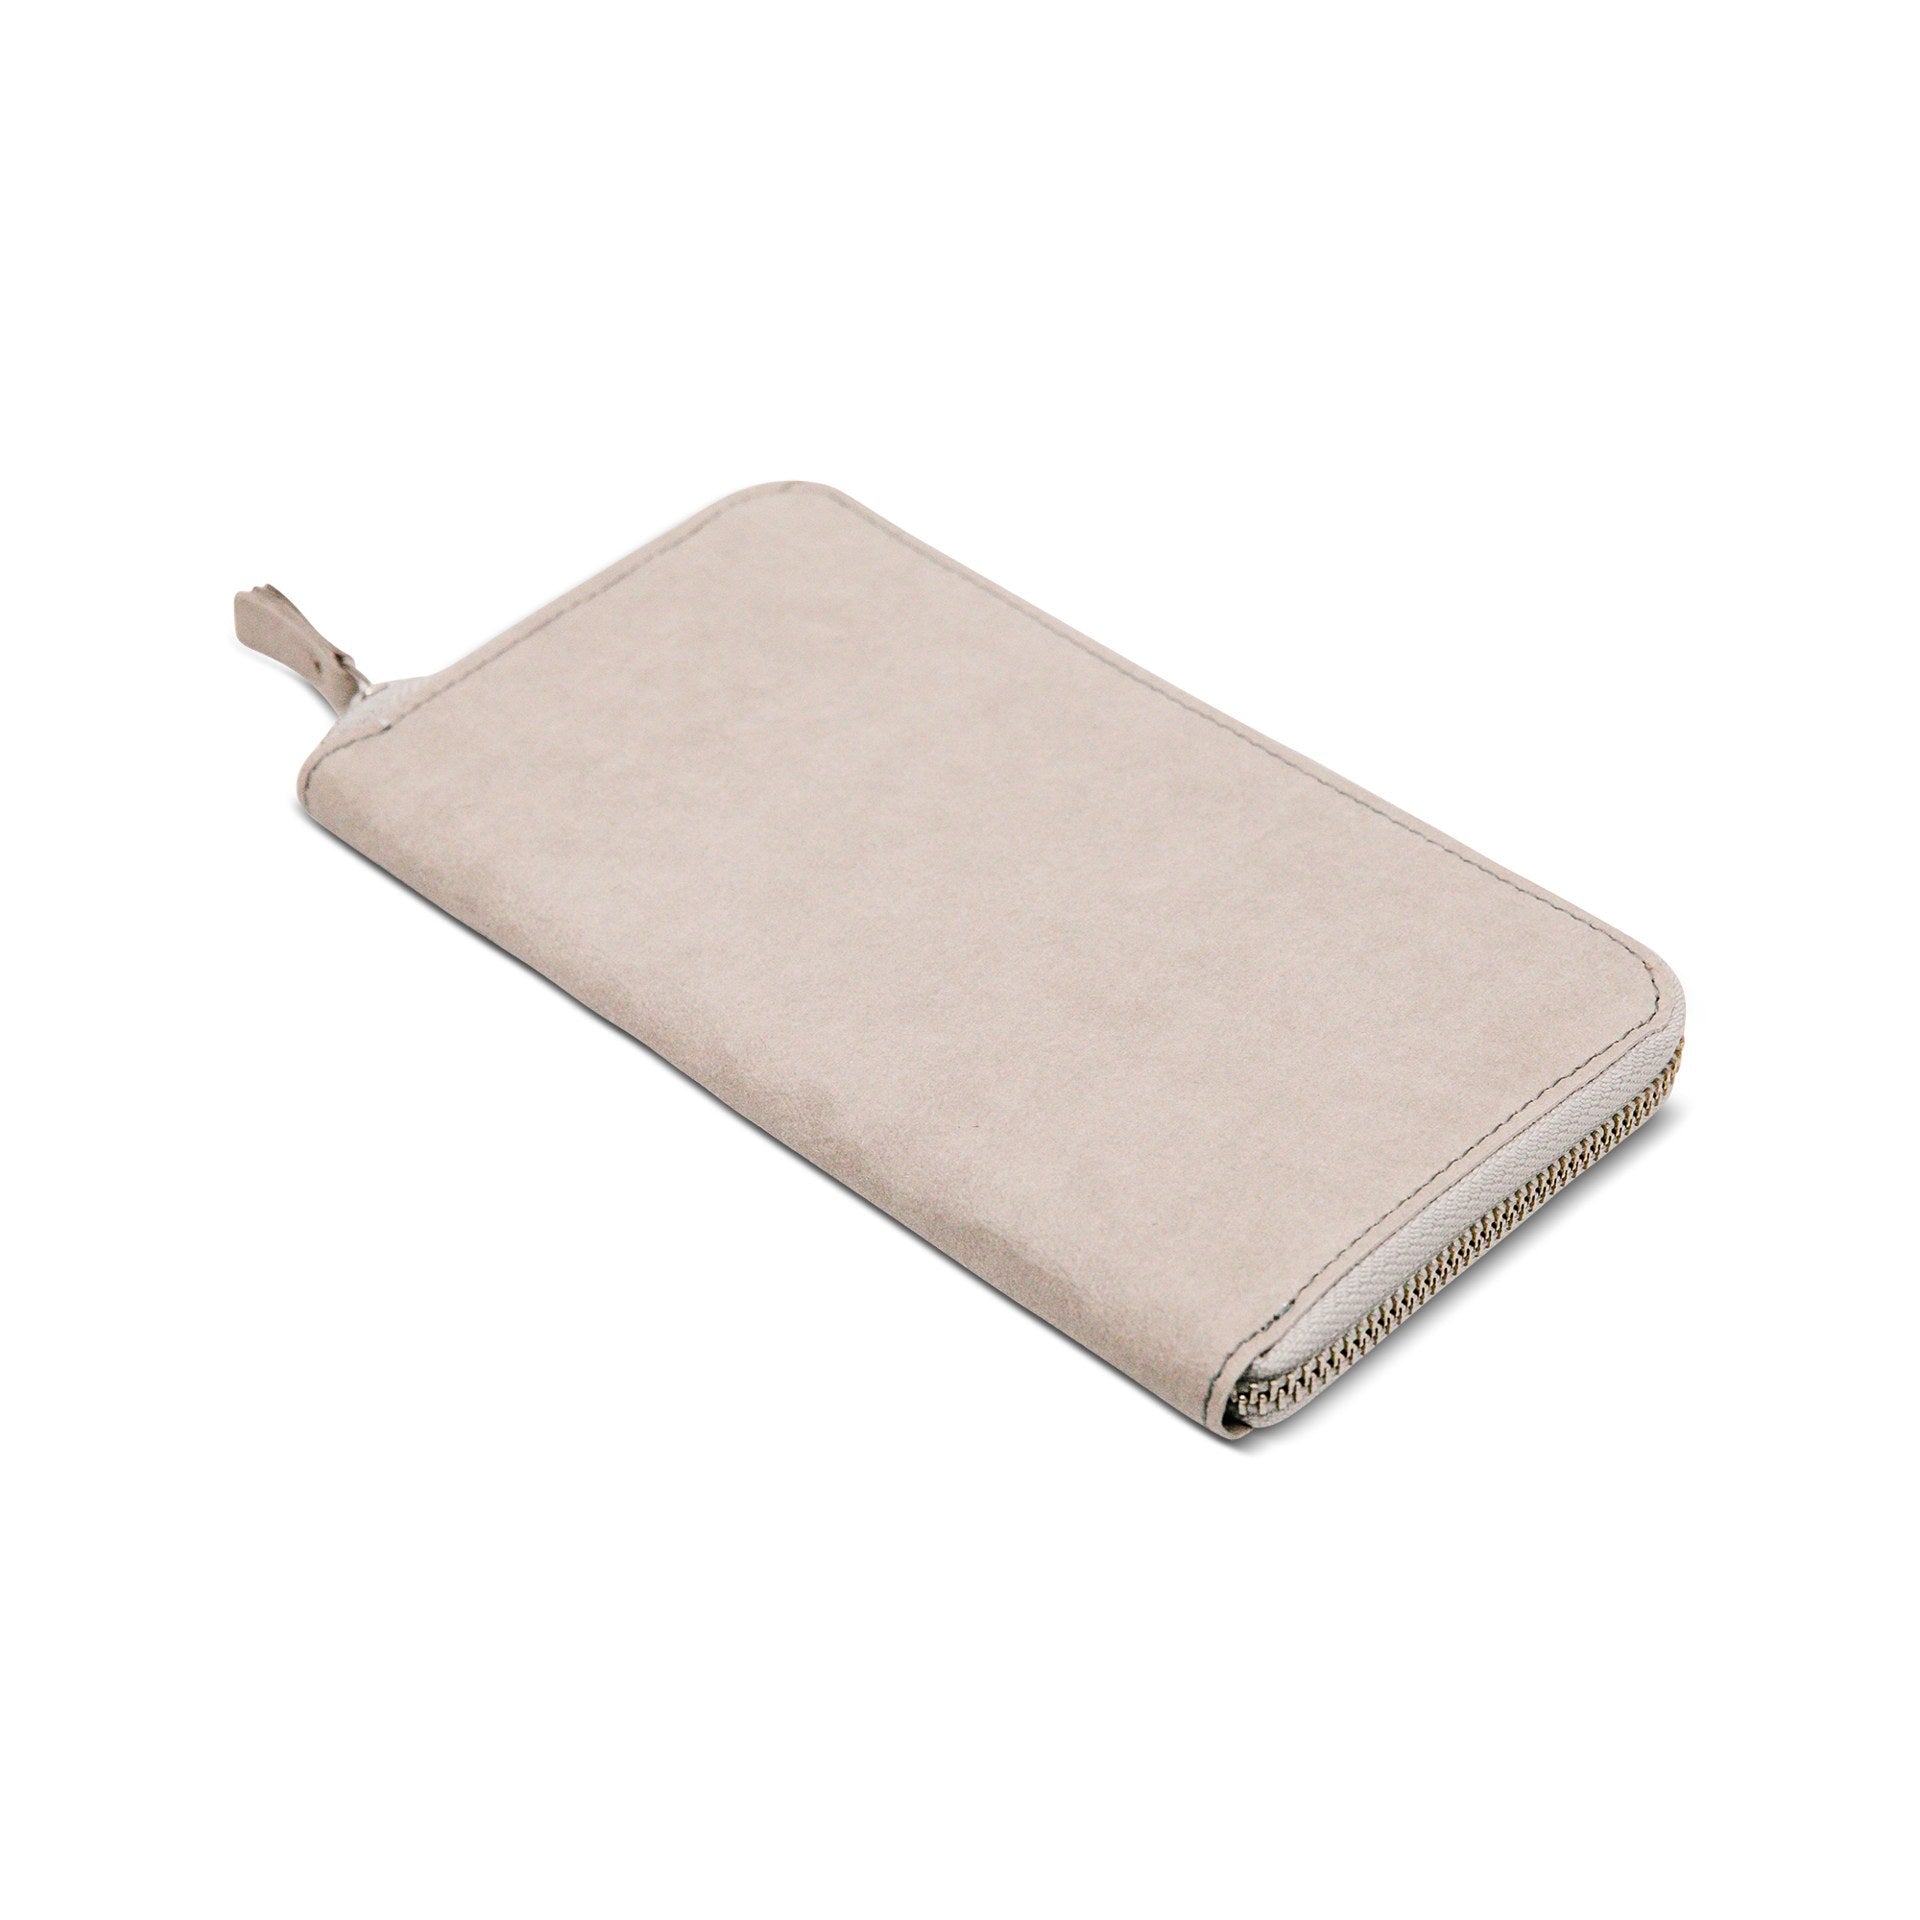 The outside of a large zippered washable paper wallet is shown. The image also shows a silver zip and washable paper zip pull. The wallet shown is pale grey.